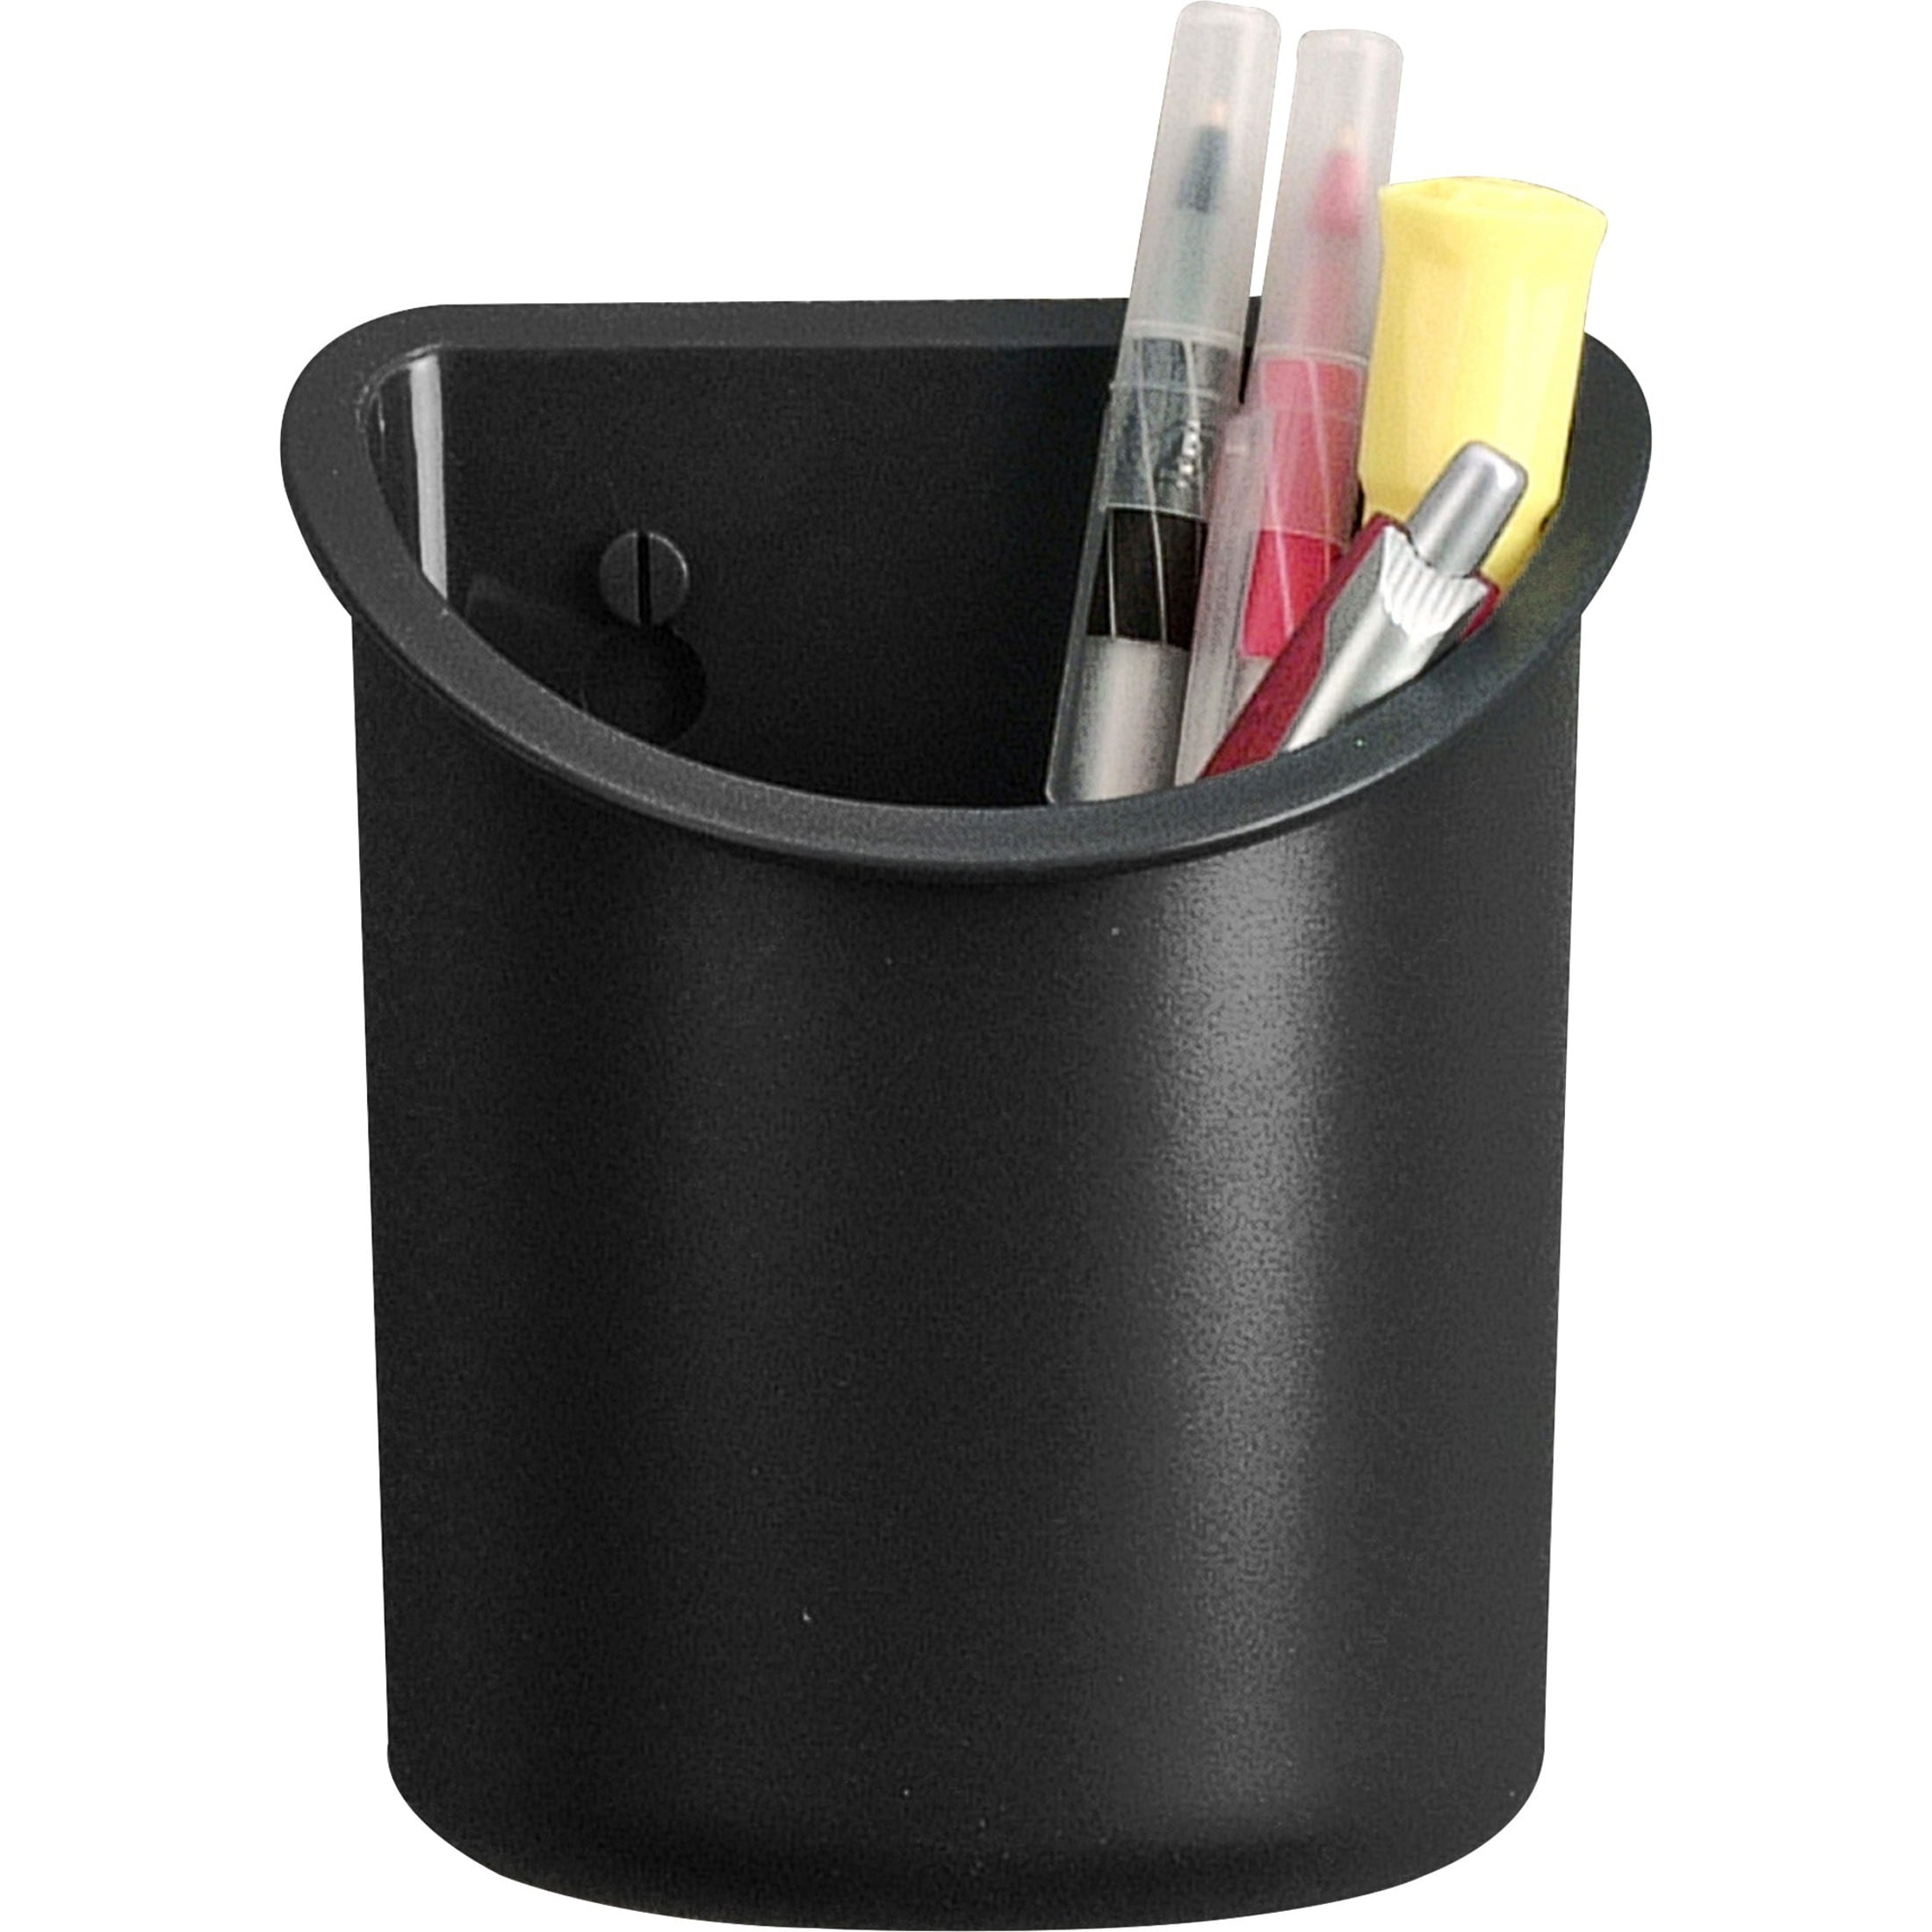 48120-GY Quartet Magnetic Pen and Pencil Cup Holder Gray